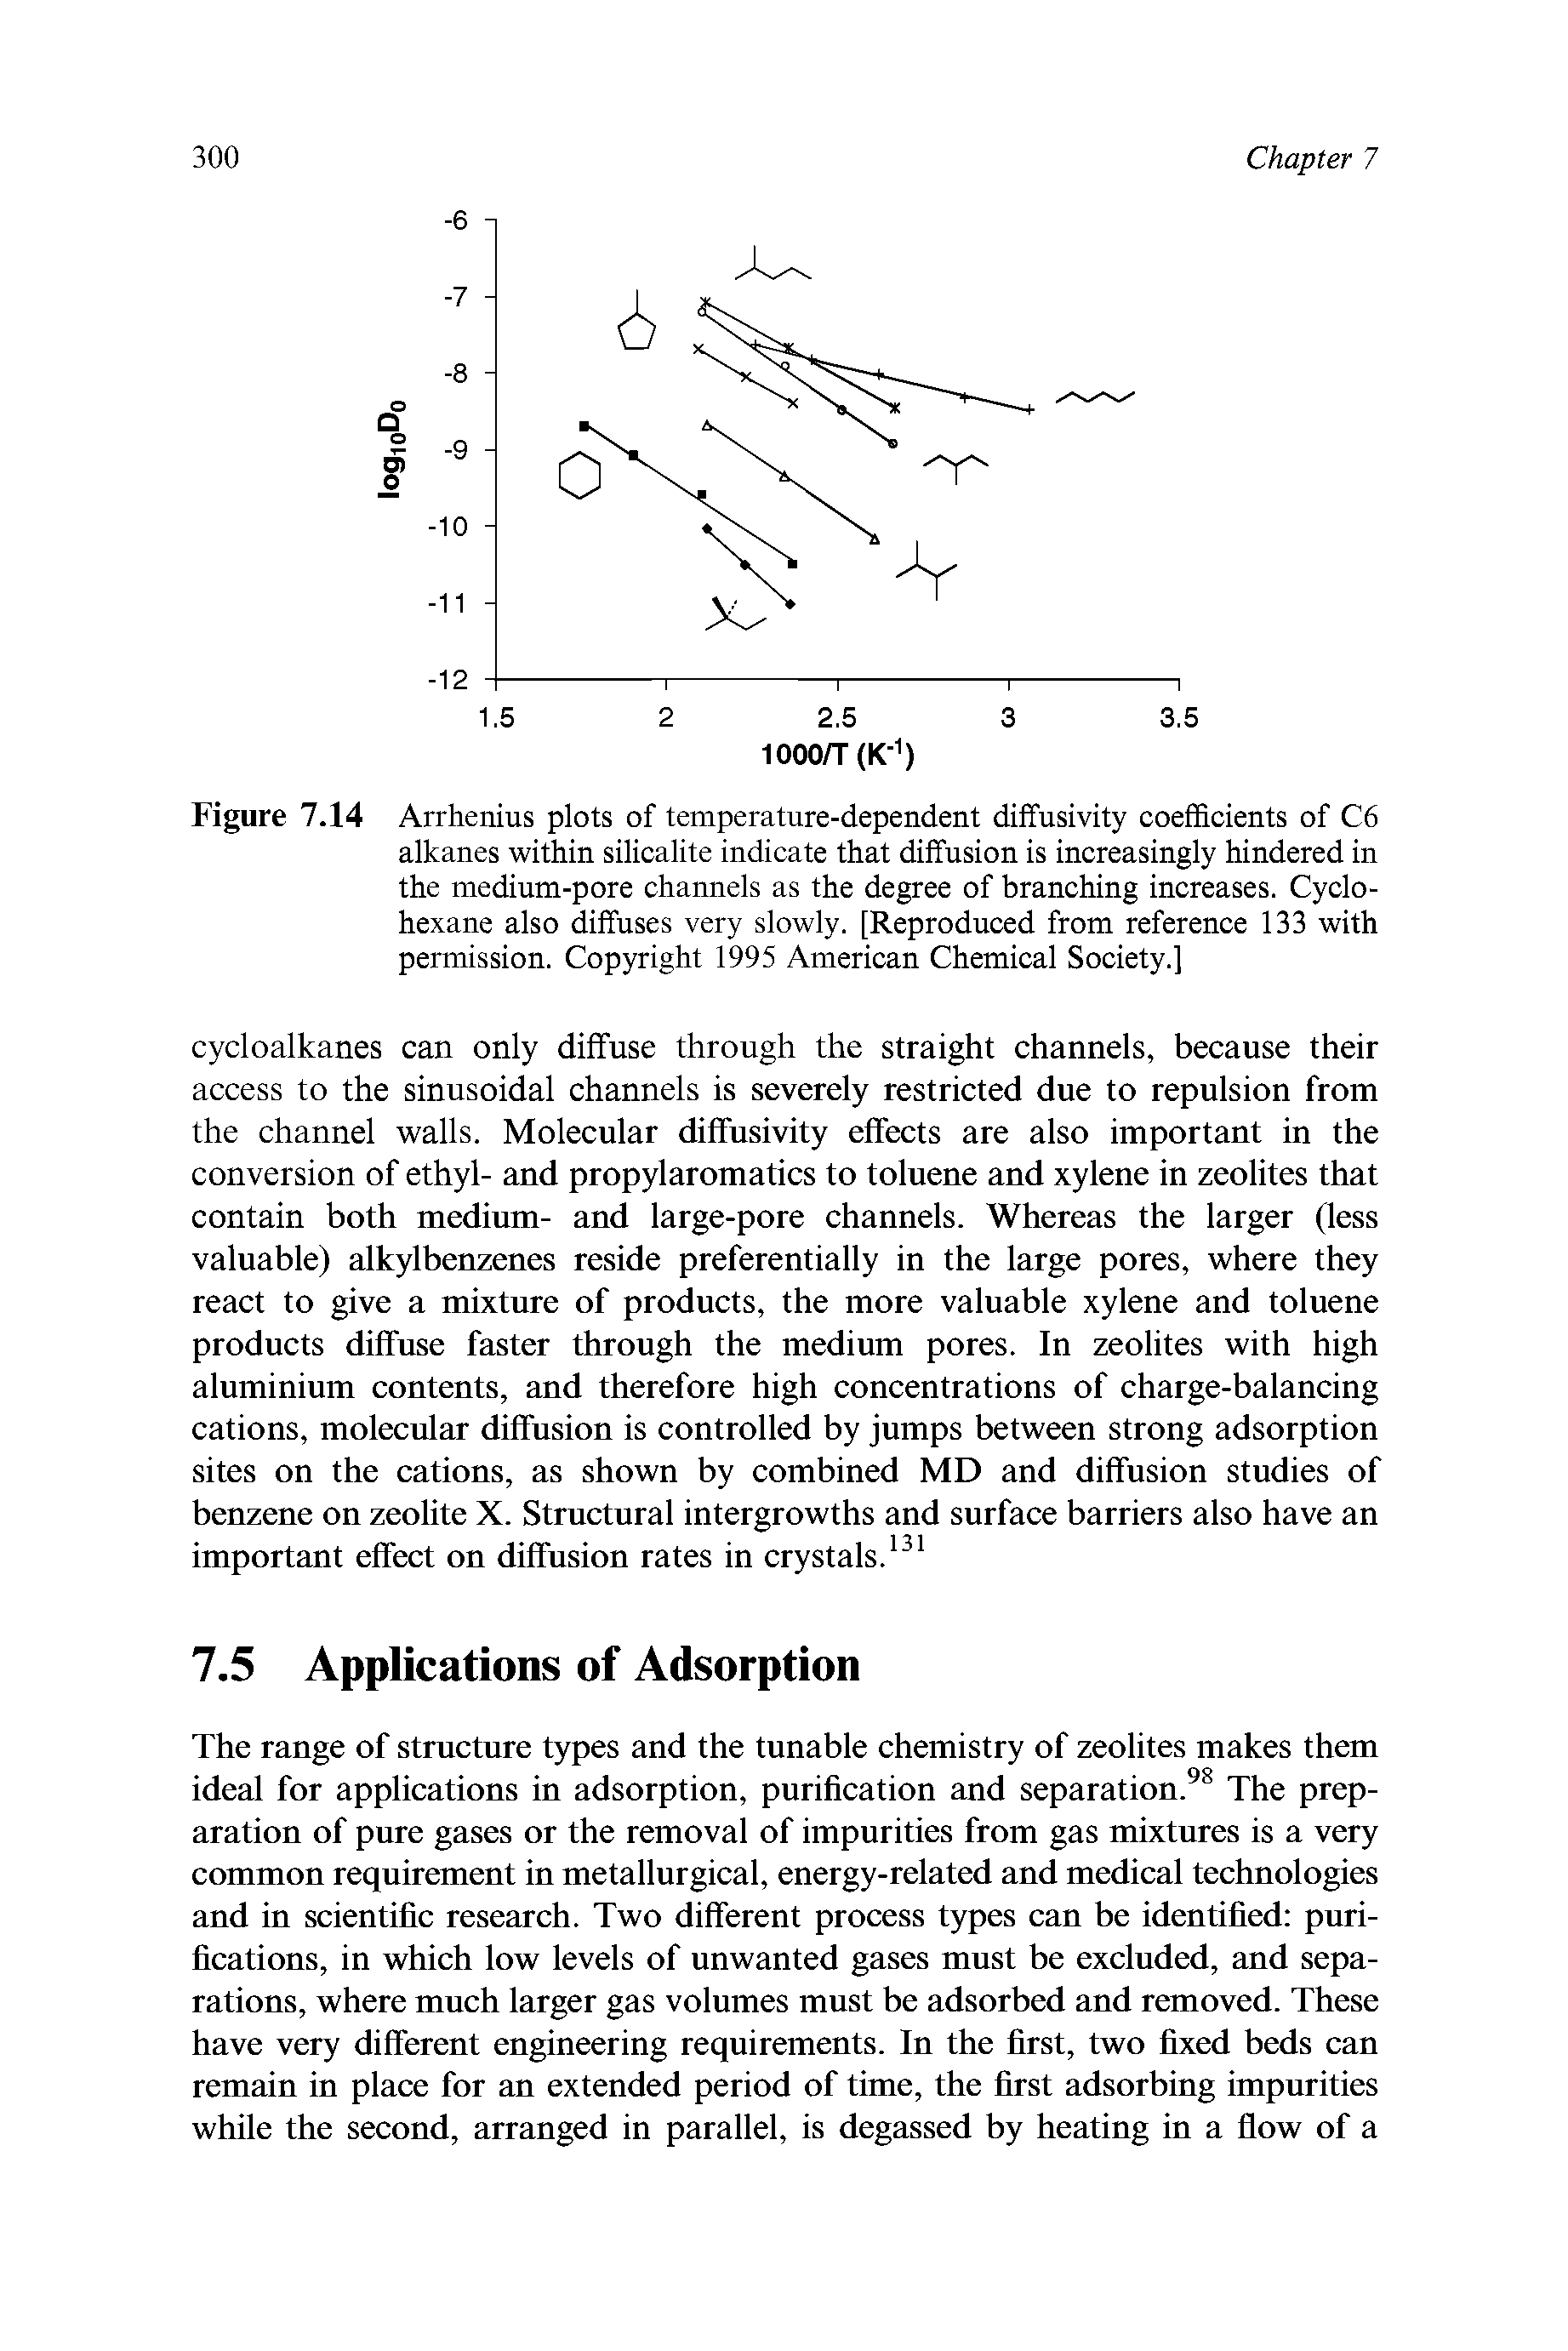 Figure 7.14 Arrhenius plots of temperature-dependent diffusivity coefficients of C6 alkanes within silicalite indicate that diffusion is increasingly hindered in the medium-pore channels as the degree of branching increases. Cyclohexane also diffuses very slowly. [Reproduced from reference 133 with permission. Copyright 1995 American Chemical Society.]...